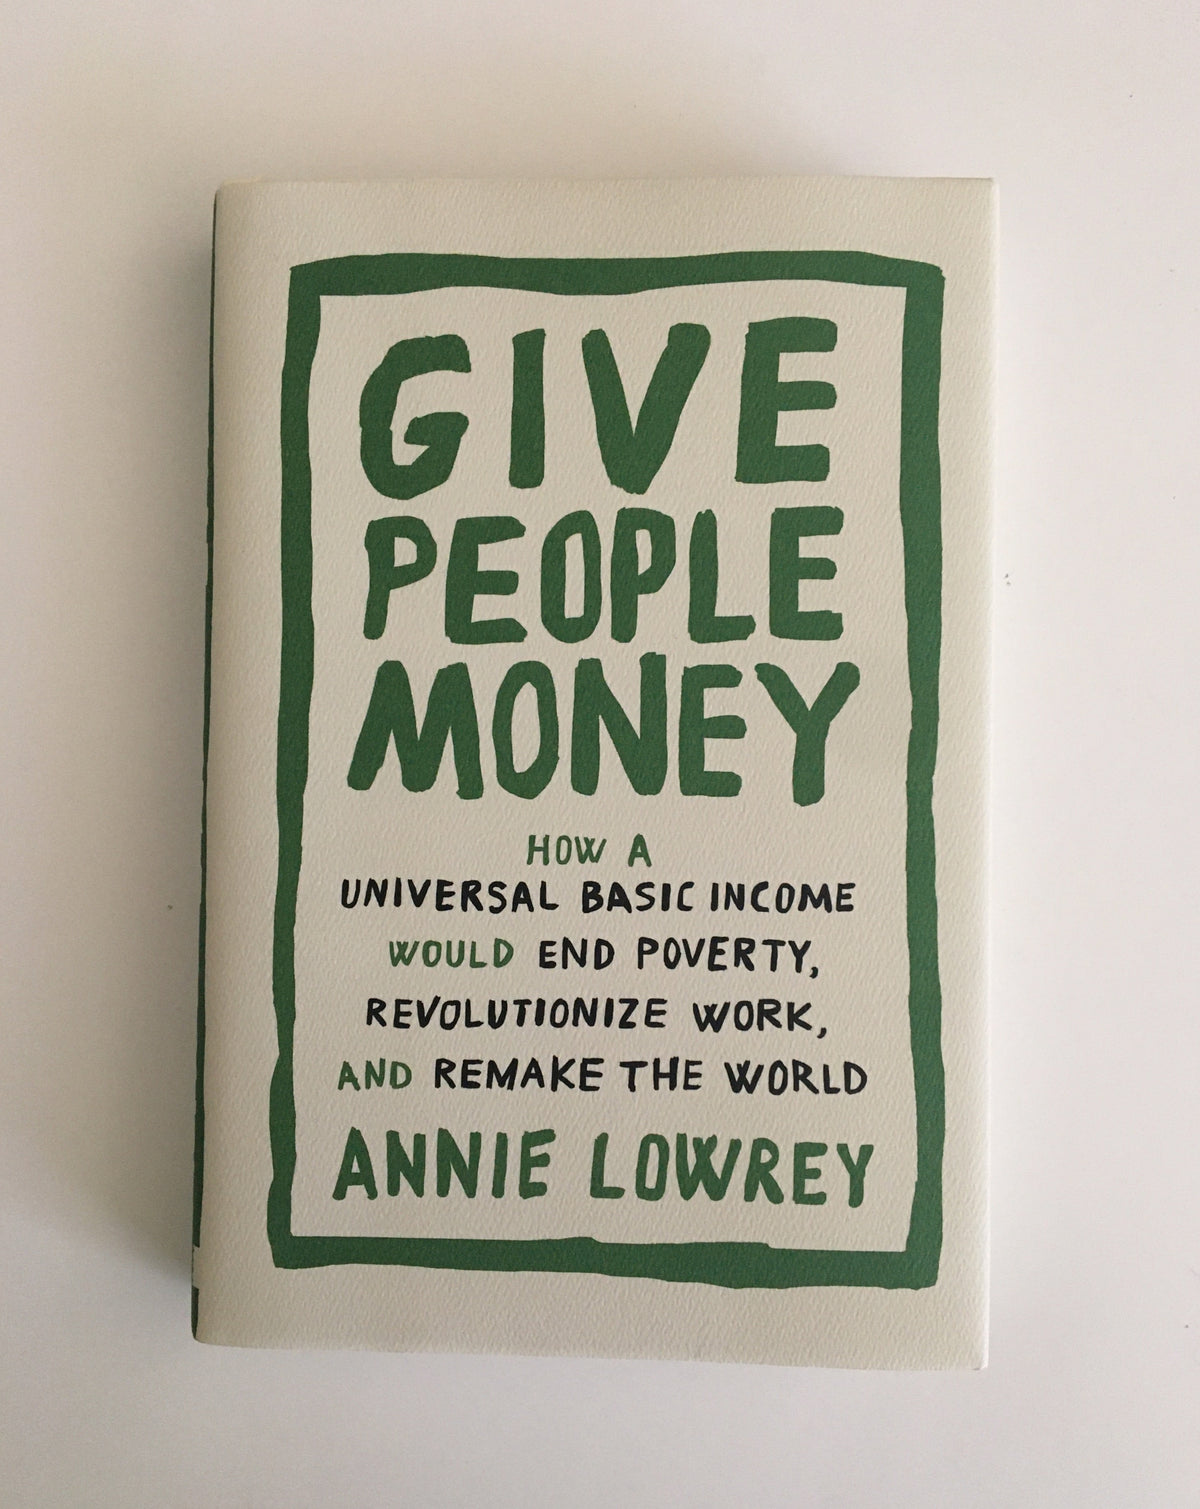 Give People Money: How a Universal Basic Income Would End Poverty, Revolutionize Work, and Remake the World by Anne Lowrey